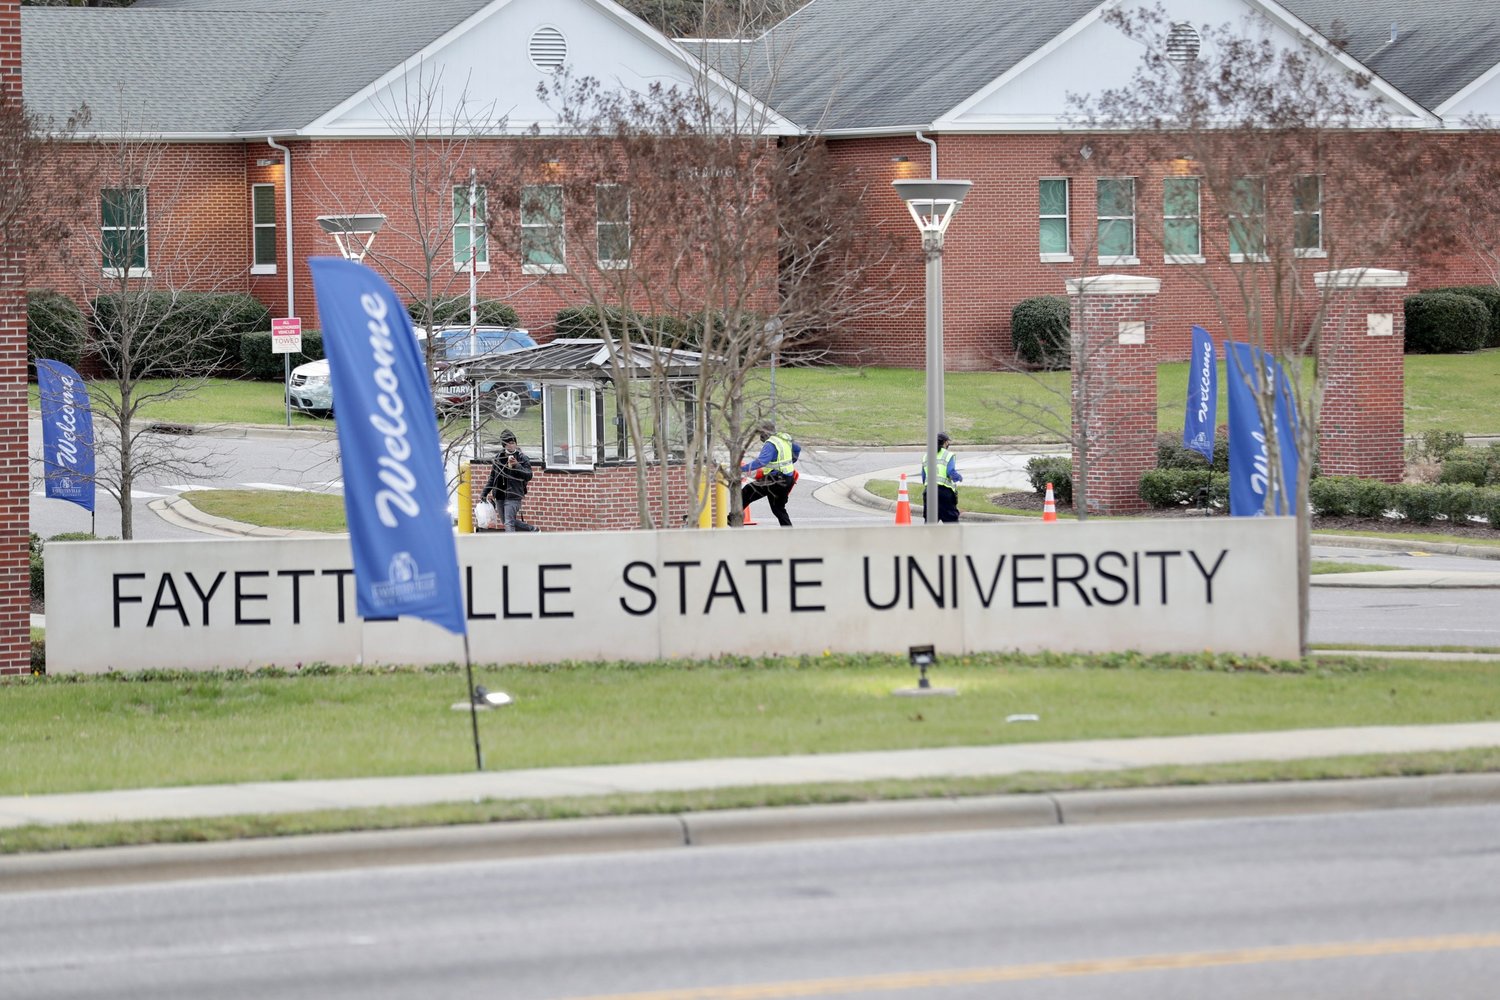 The all-clear signal was given at Fayetteville State University following a bomb threat that led officials to suspend classes Wednesday.